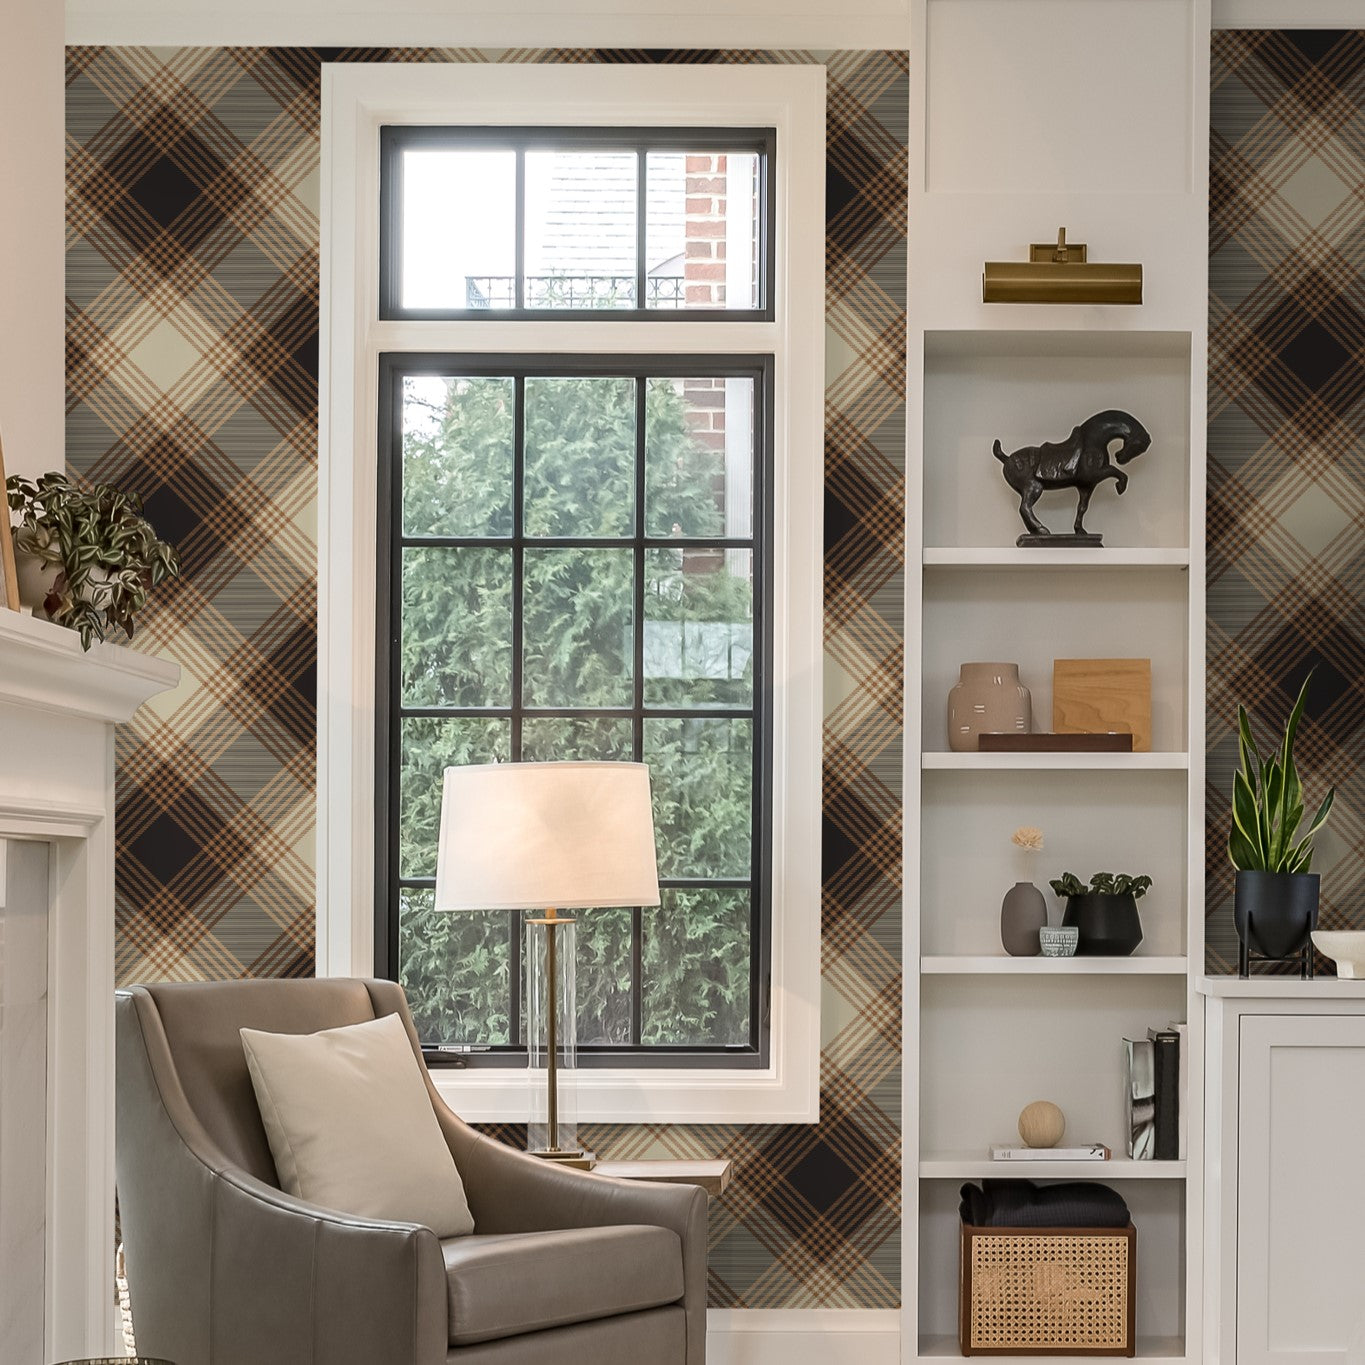 "Franklin Wallpaper by Wall Blush installed in a cozy living room, showcasing patterned wall focus."